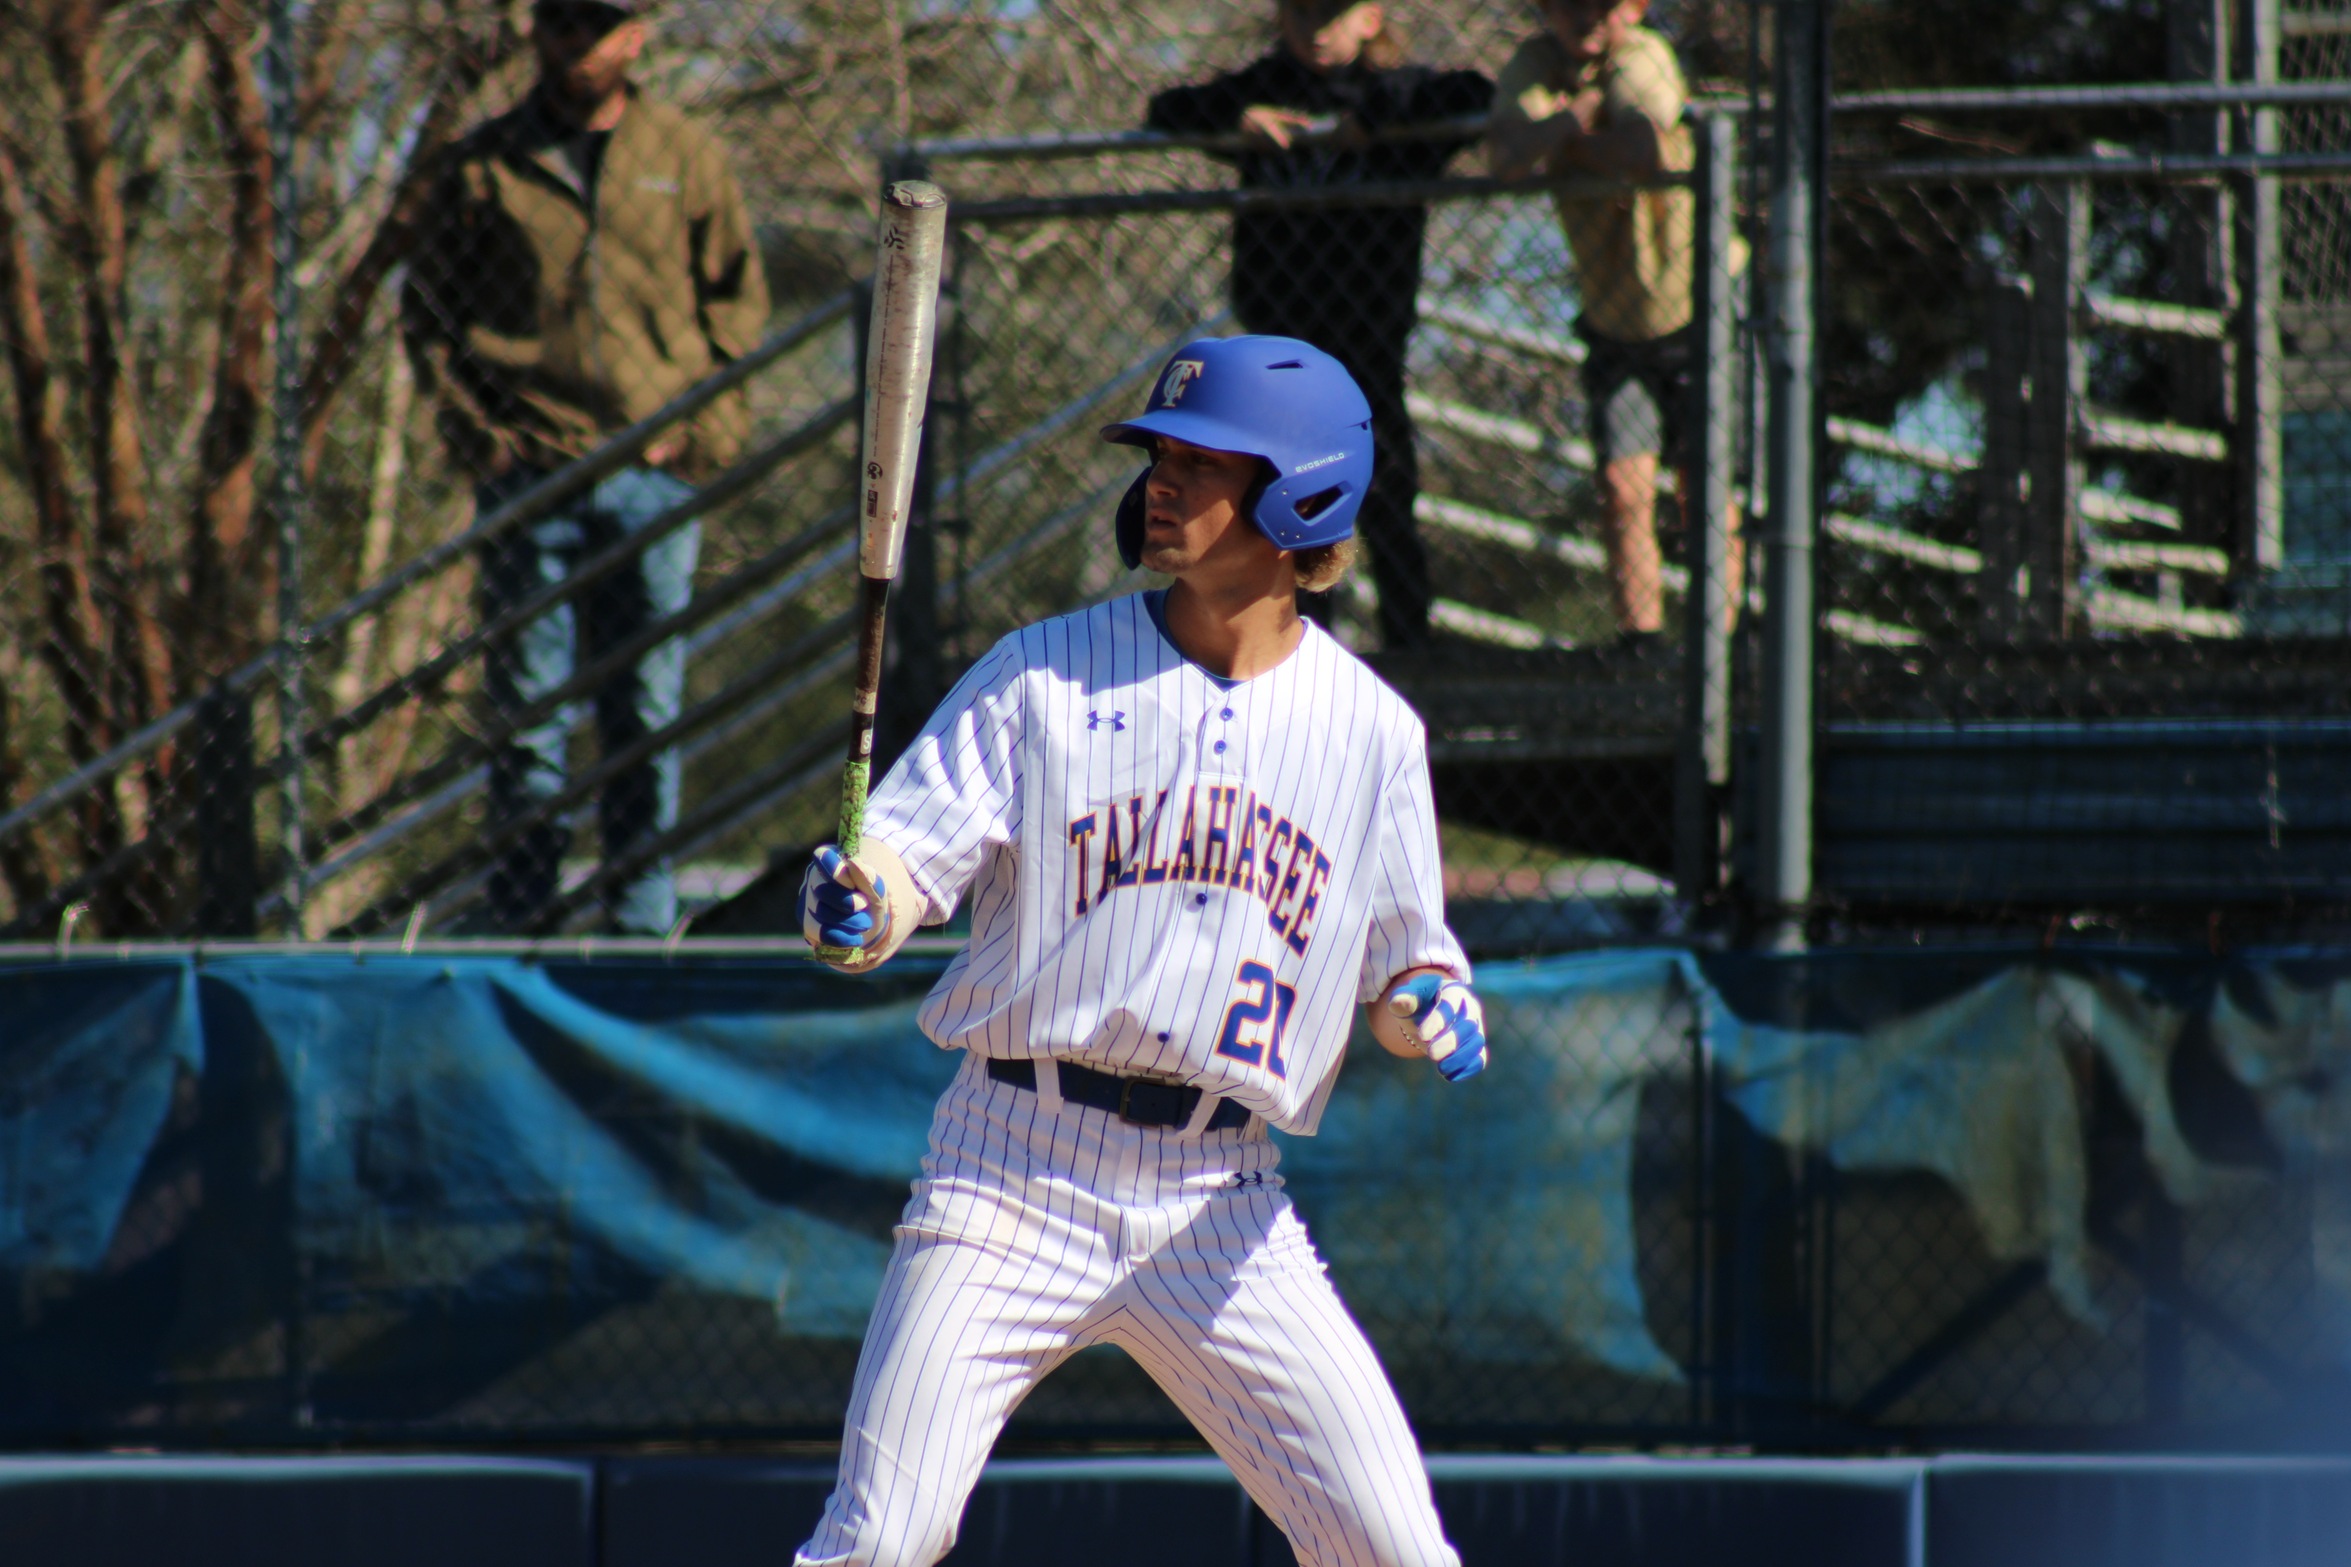 TCC dominates to complete sweep of Shelton State